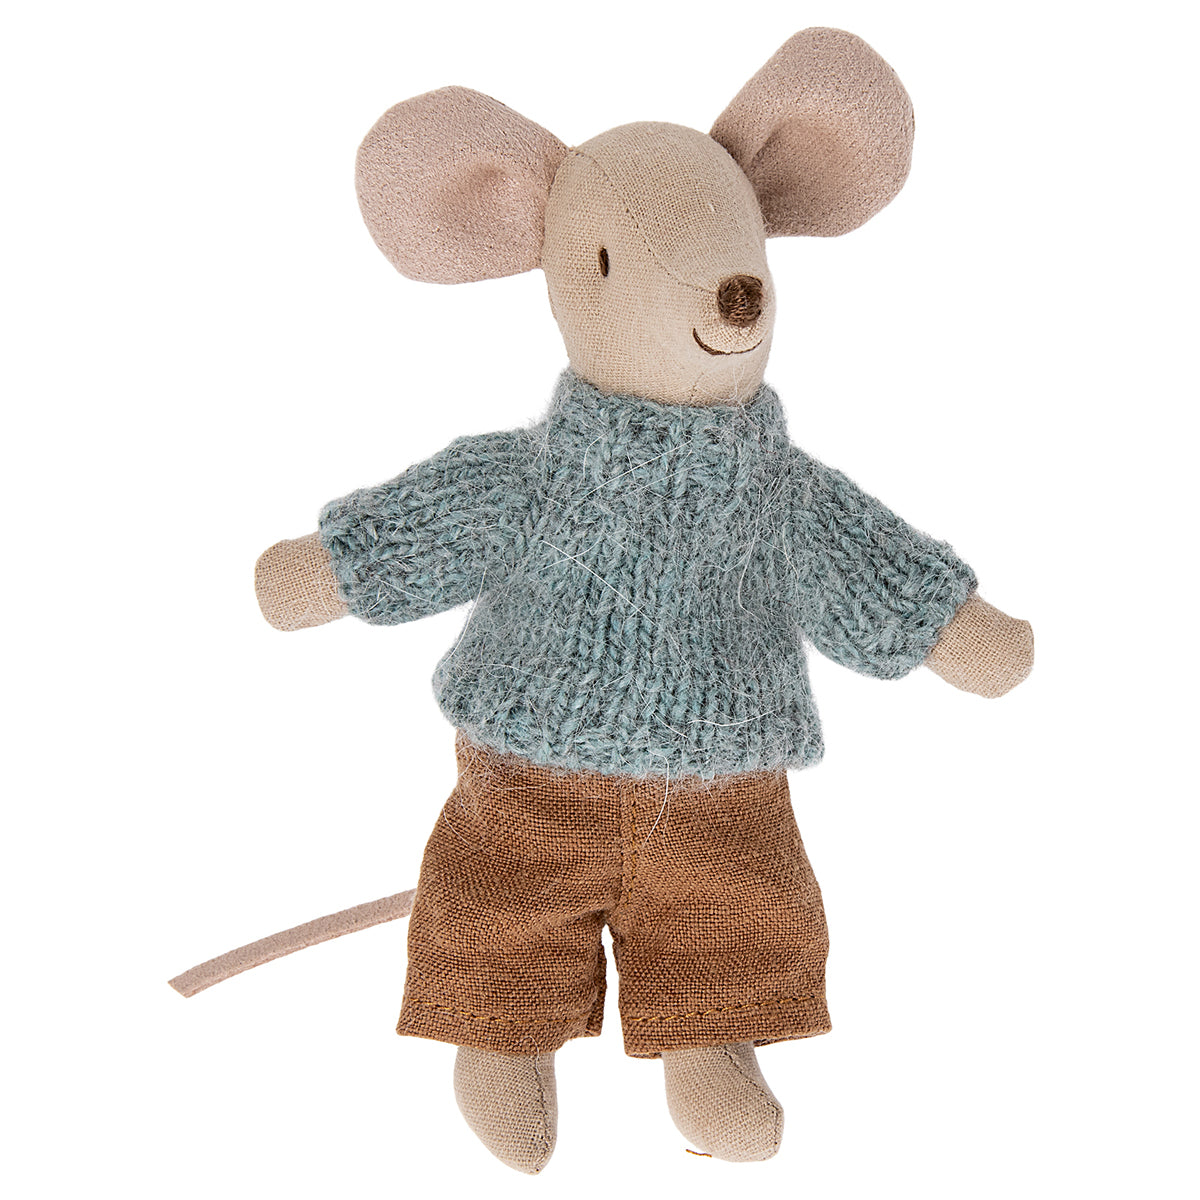 Maileg Knitted Sweater & Pants For Big Brother Mouse 17-2214-02